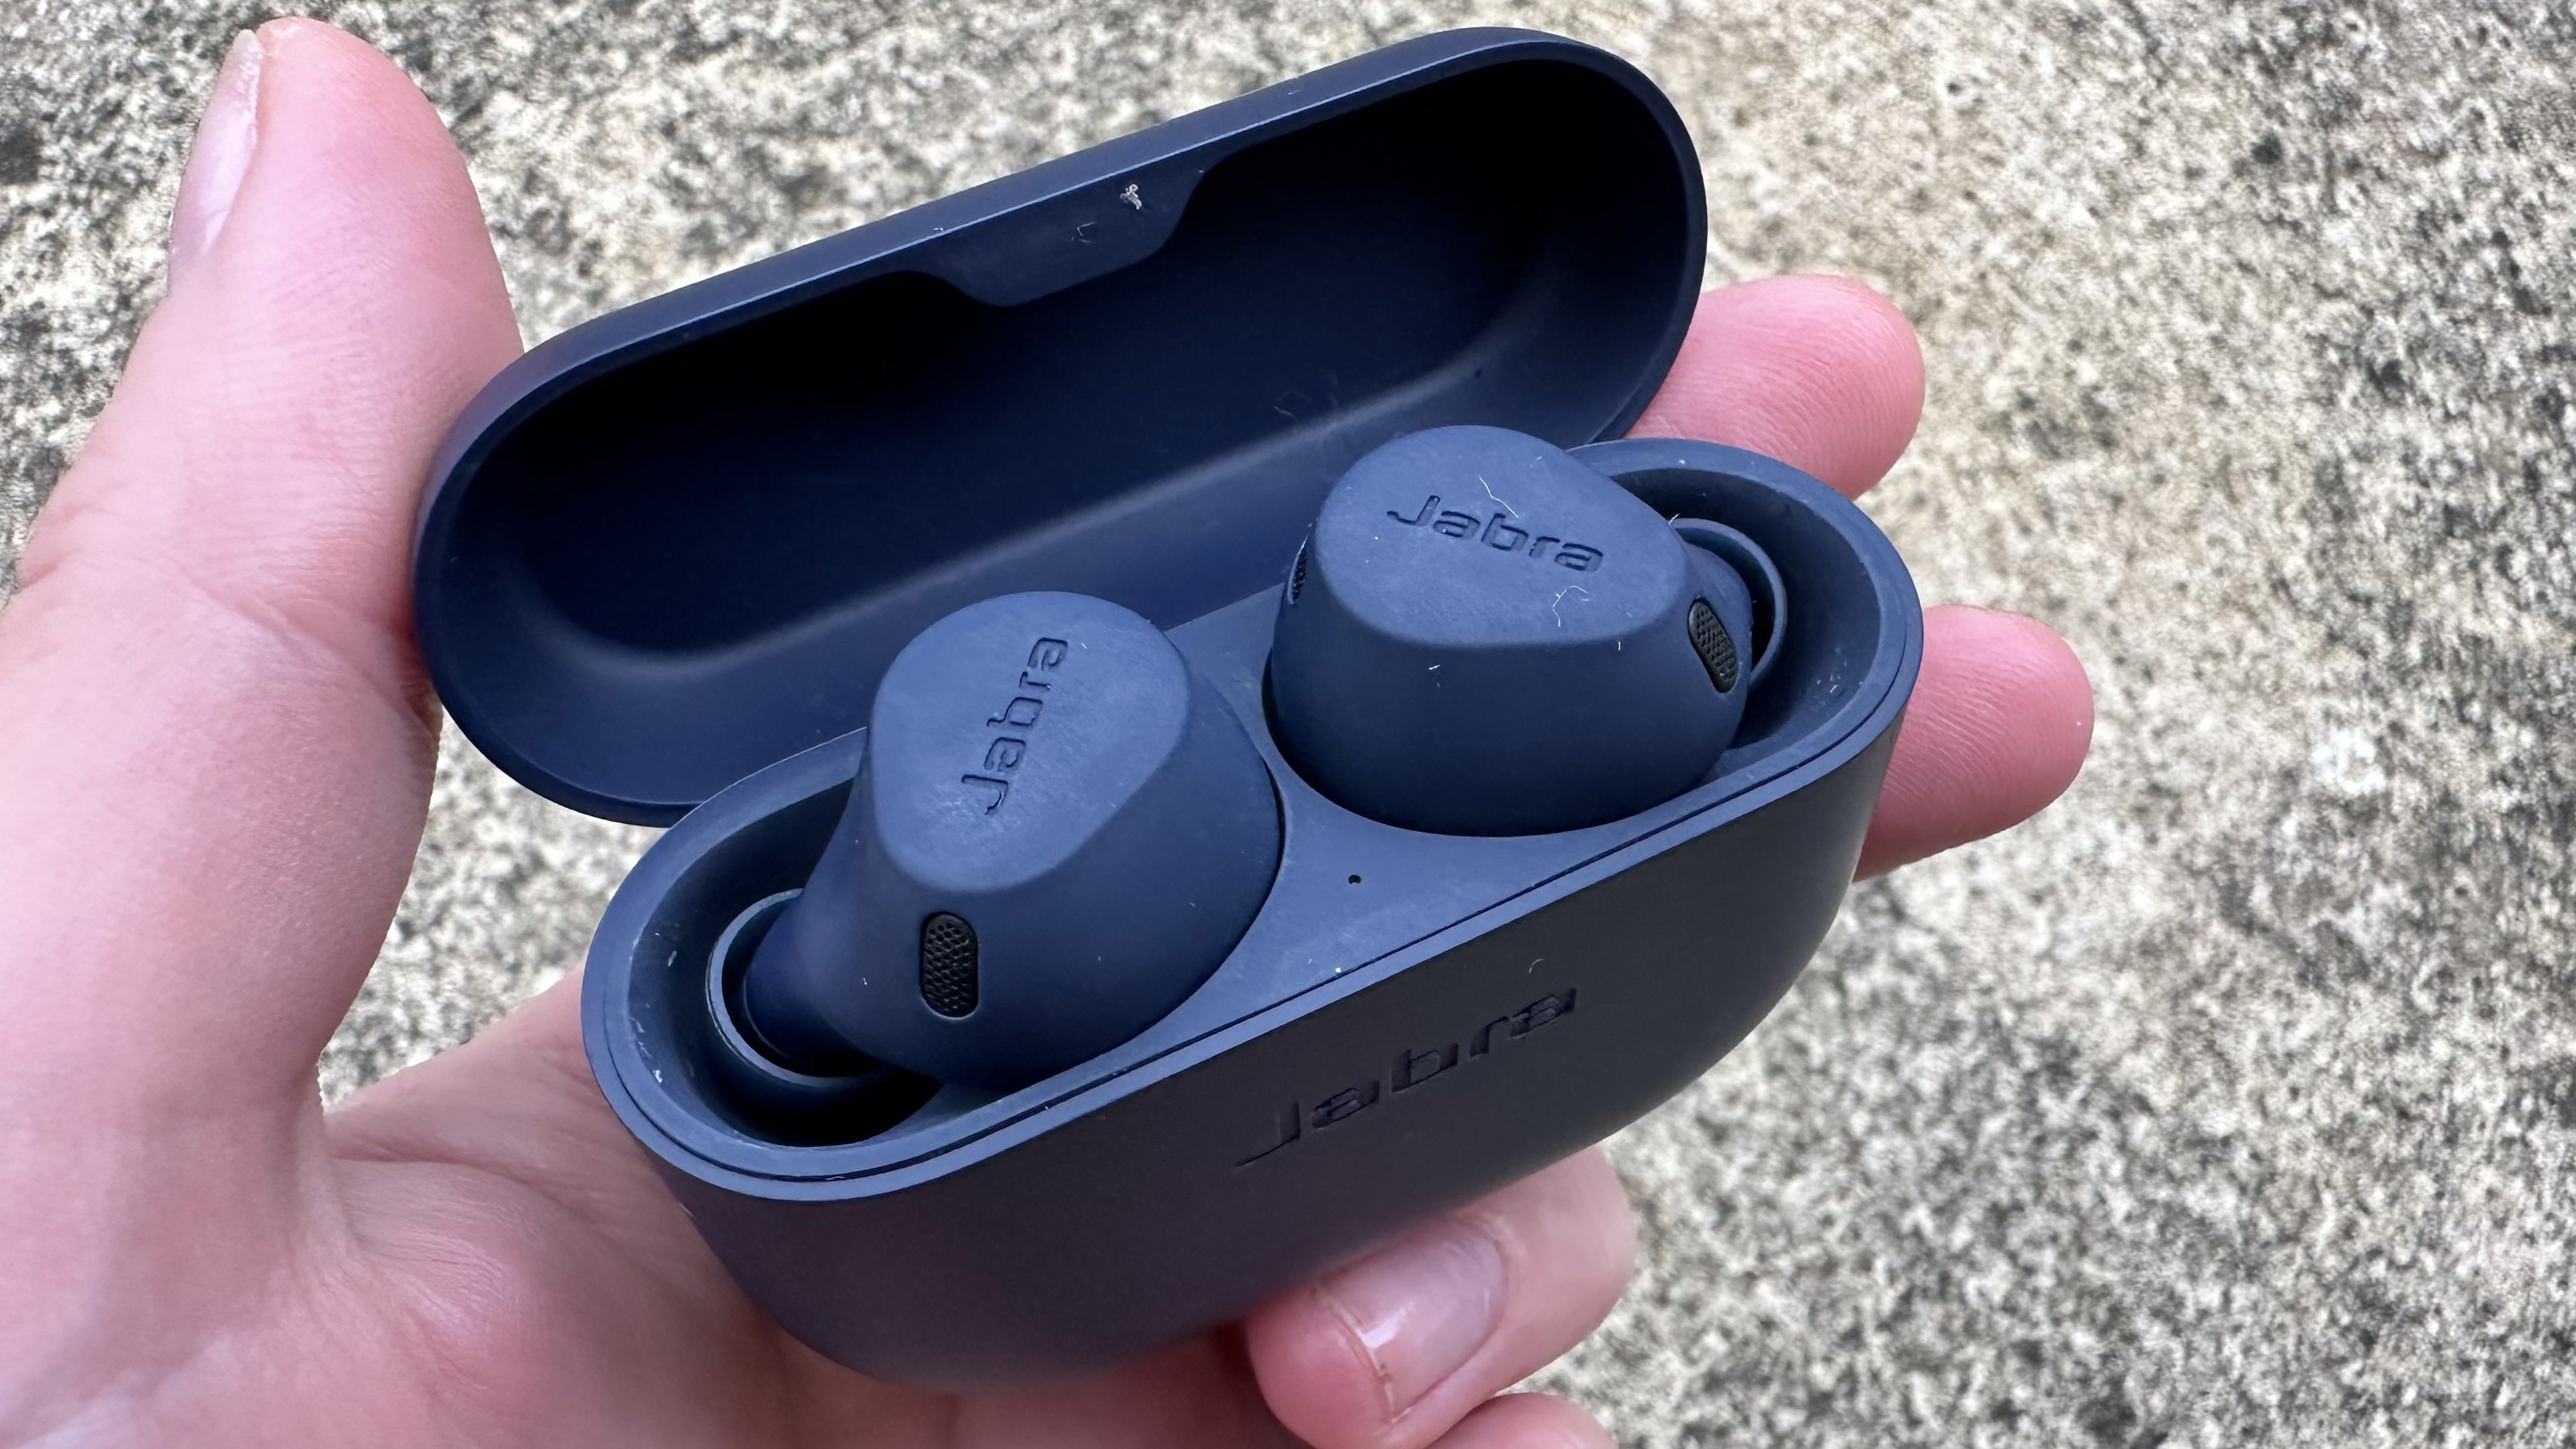 Jabra Elite 8 Active review: are these the best earbuds for